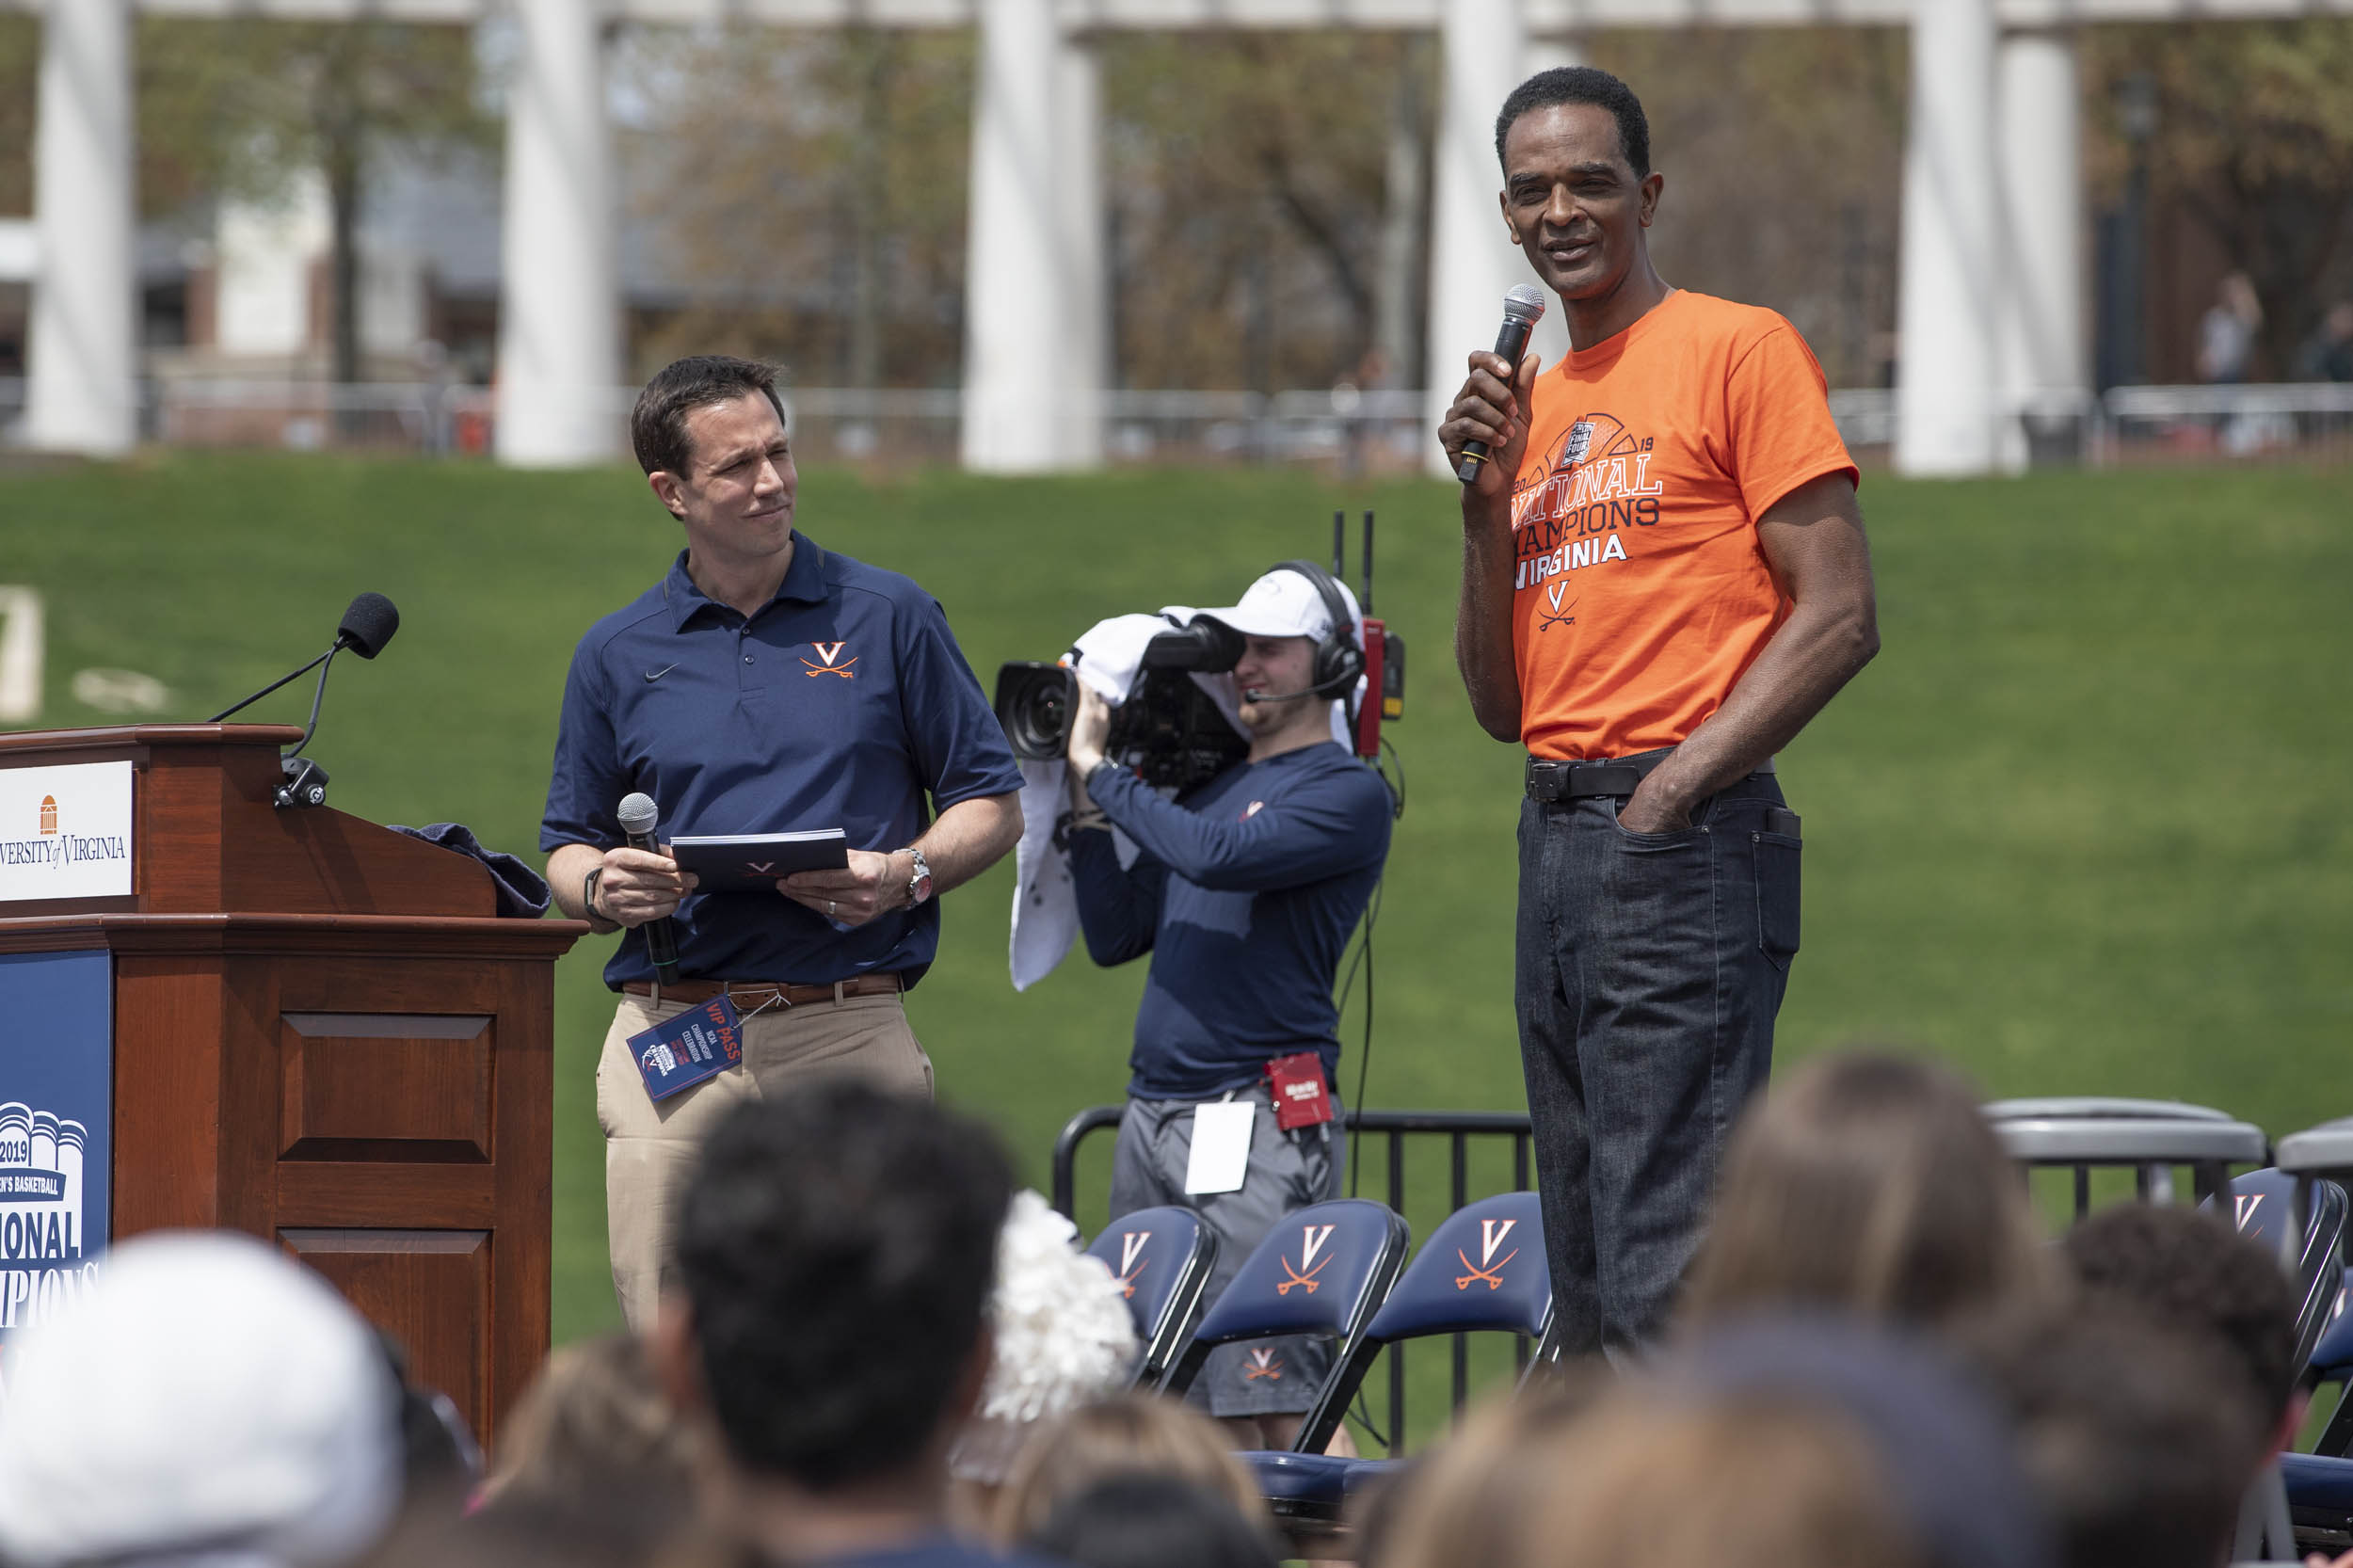 Ralph Sampson stands on stage talking to crowd